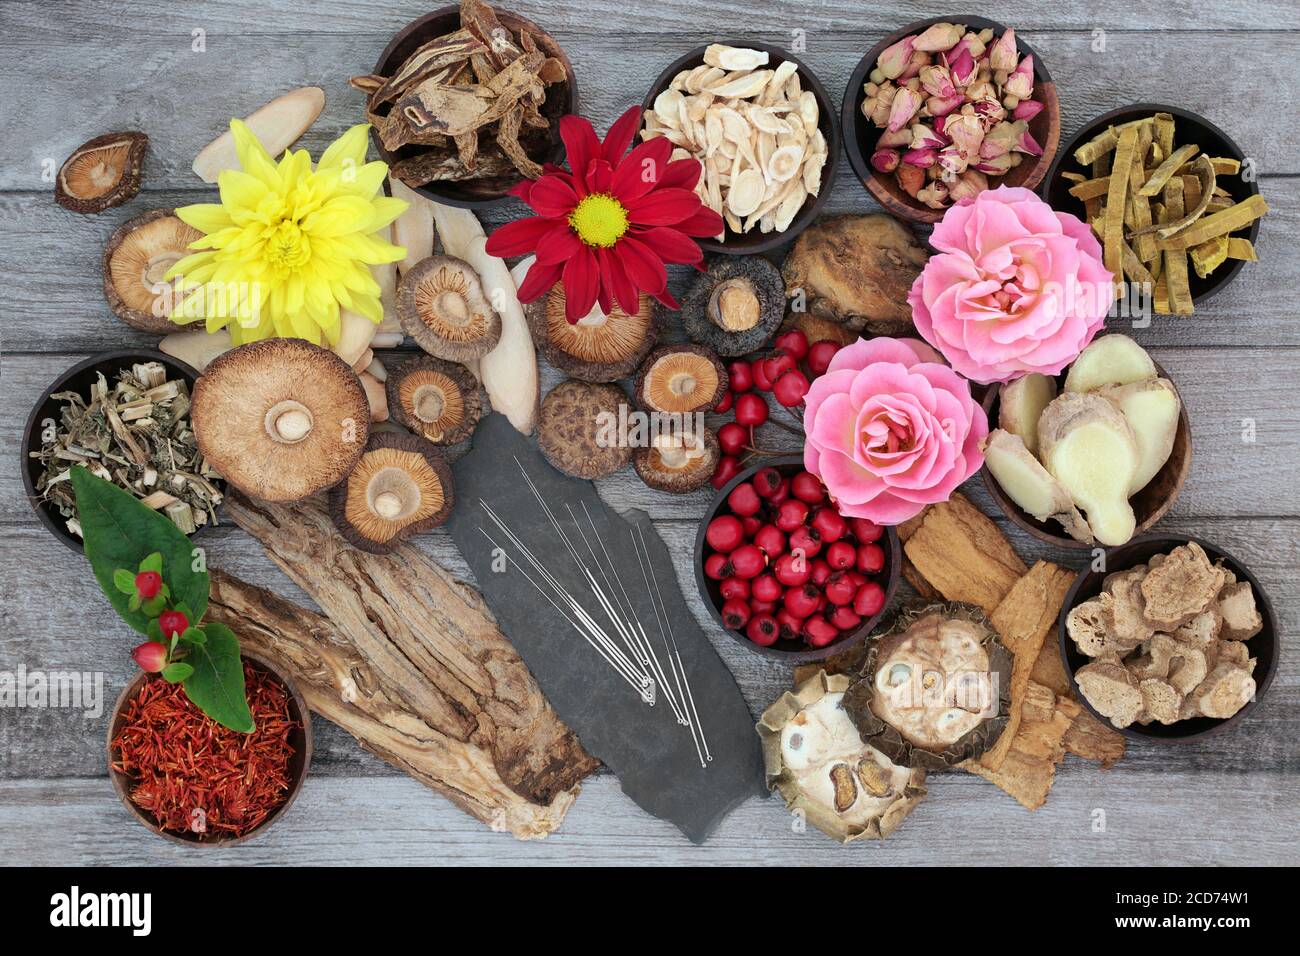 Chinese herbs, spices &  flowers with acupuncture needles used in traditional herbal medicine on rustic wood background. Stock Photo